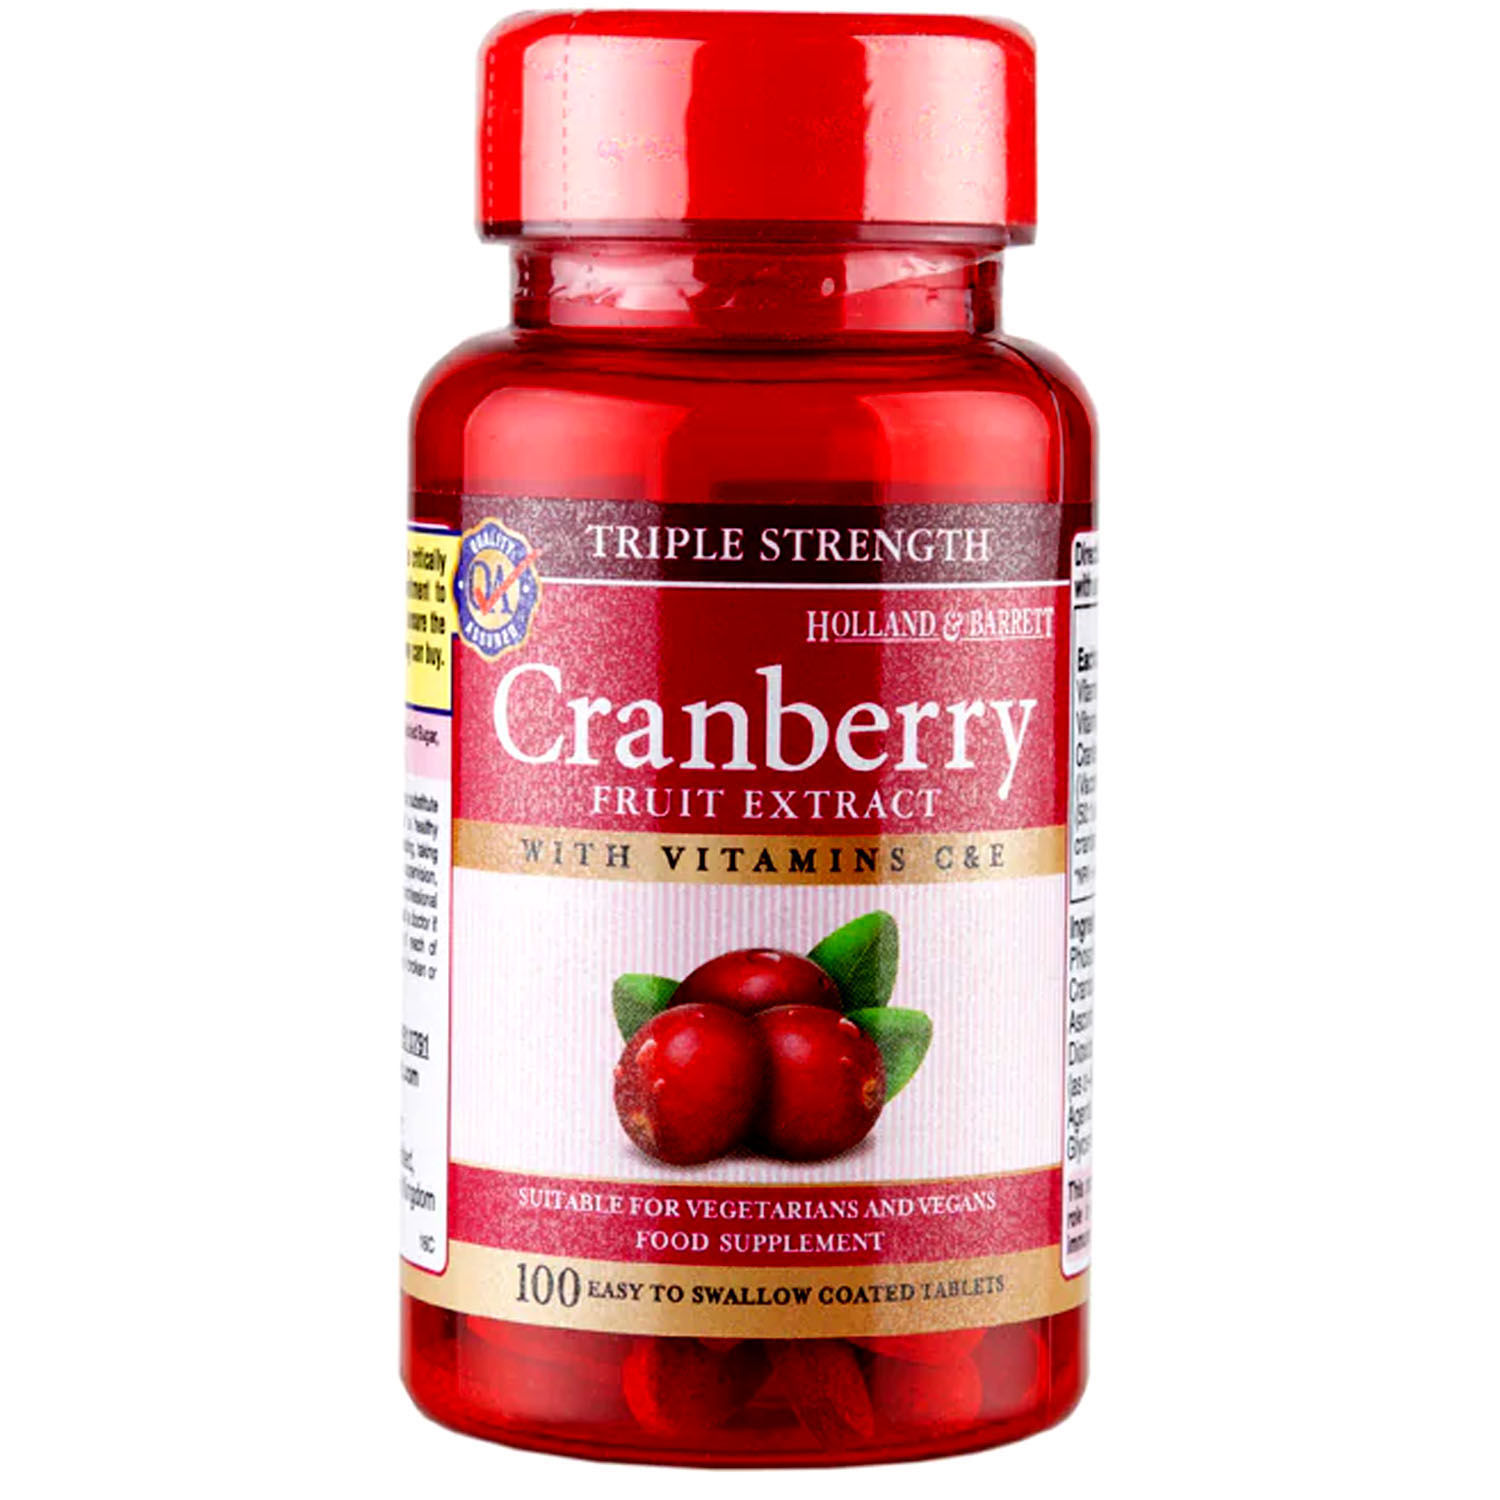 Buy Holland & Barrett Triple Strength, Cranberry Fruit Extract, 100 Tablets Online